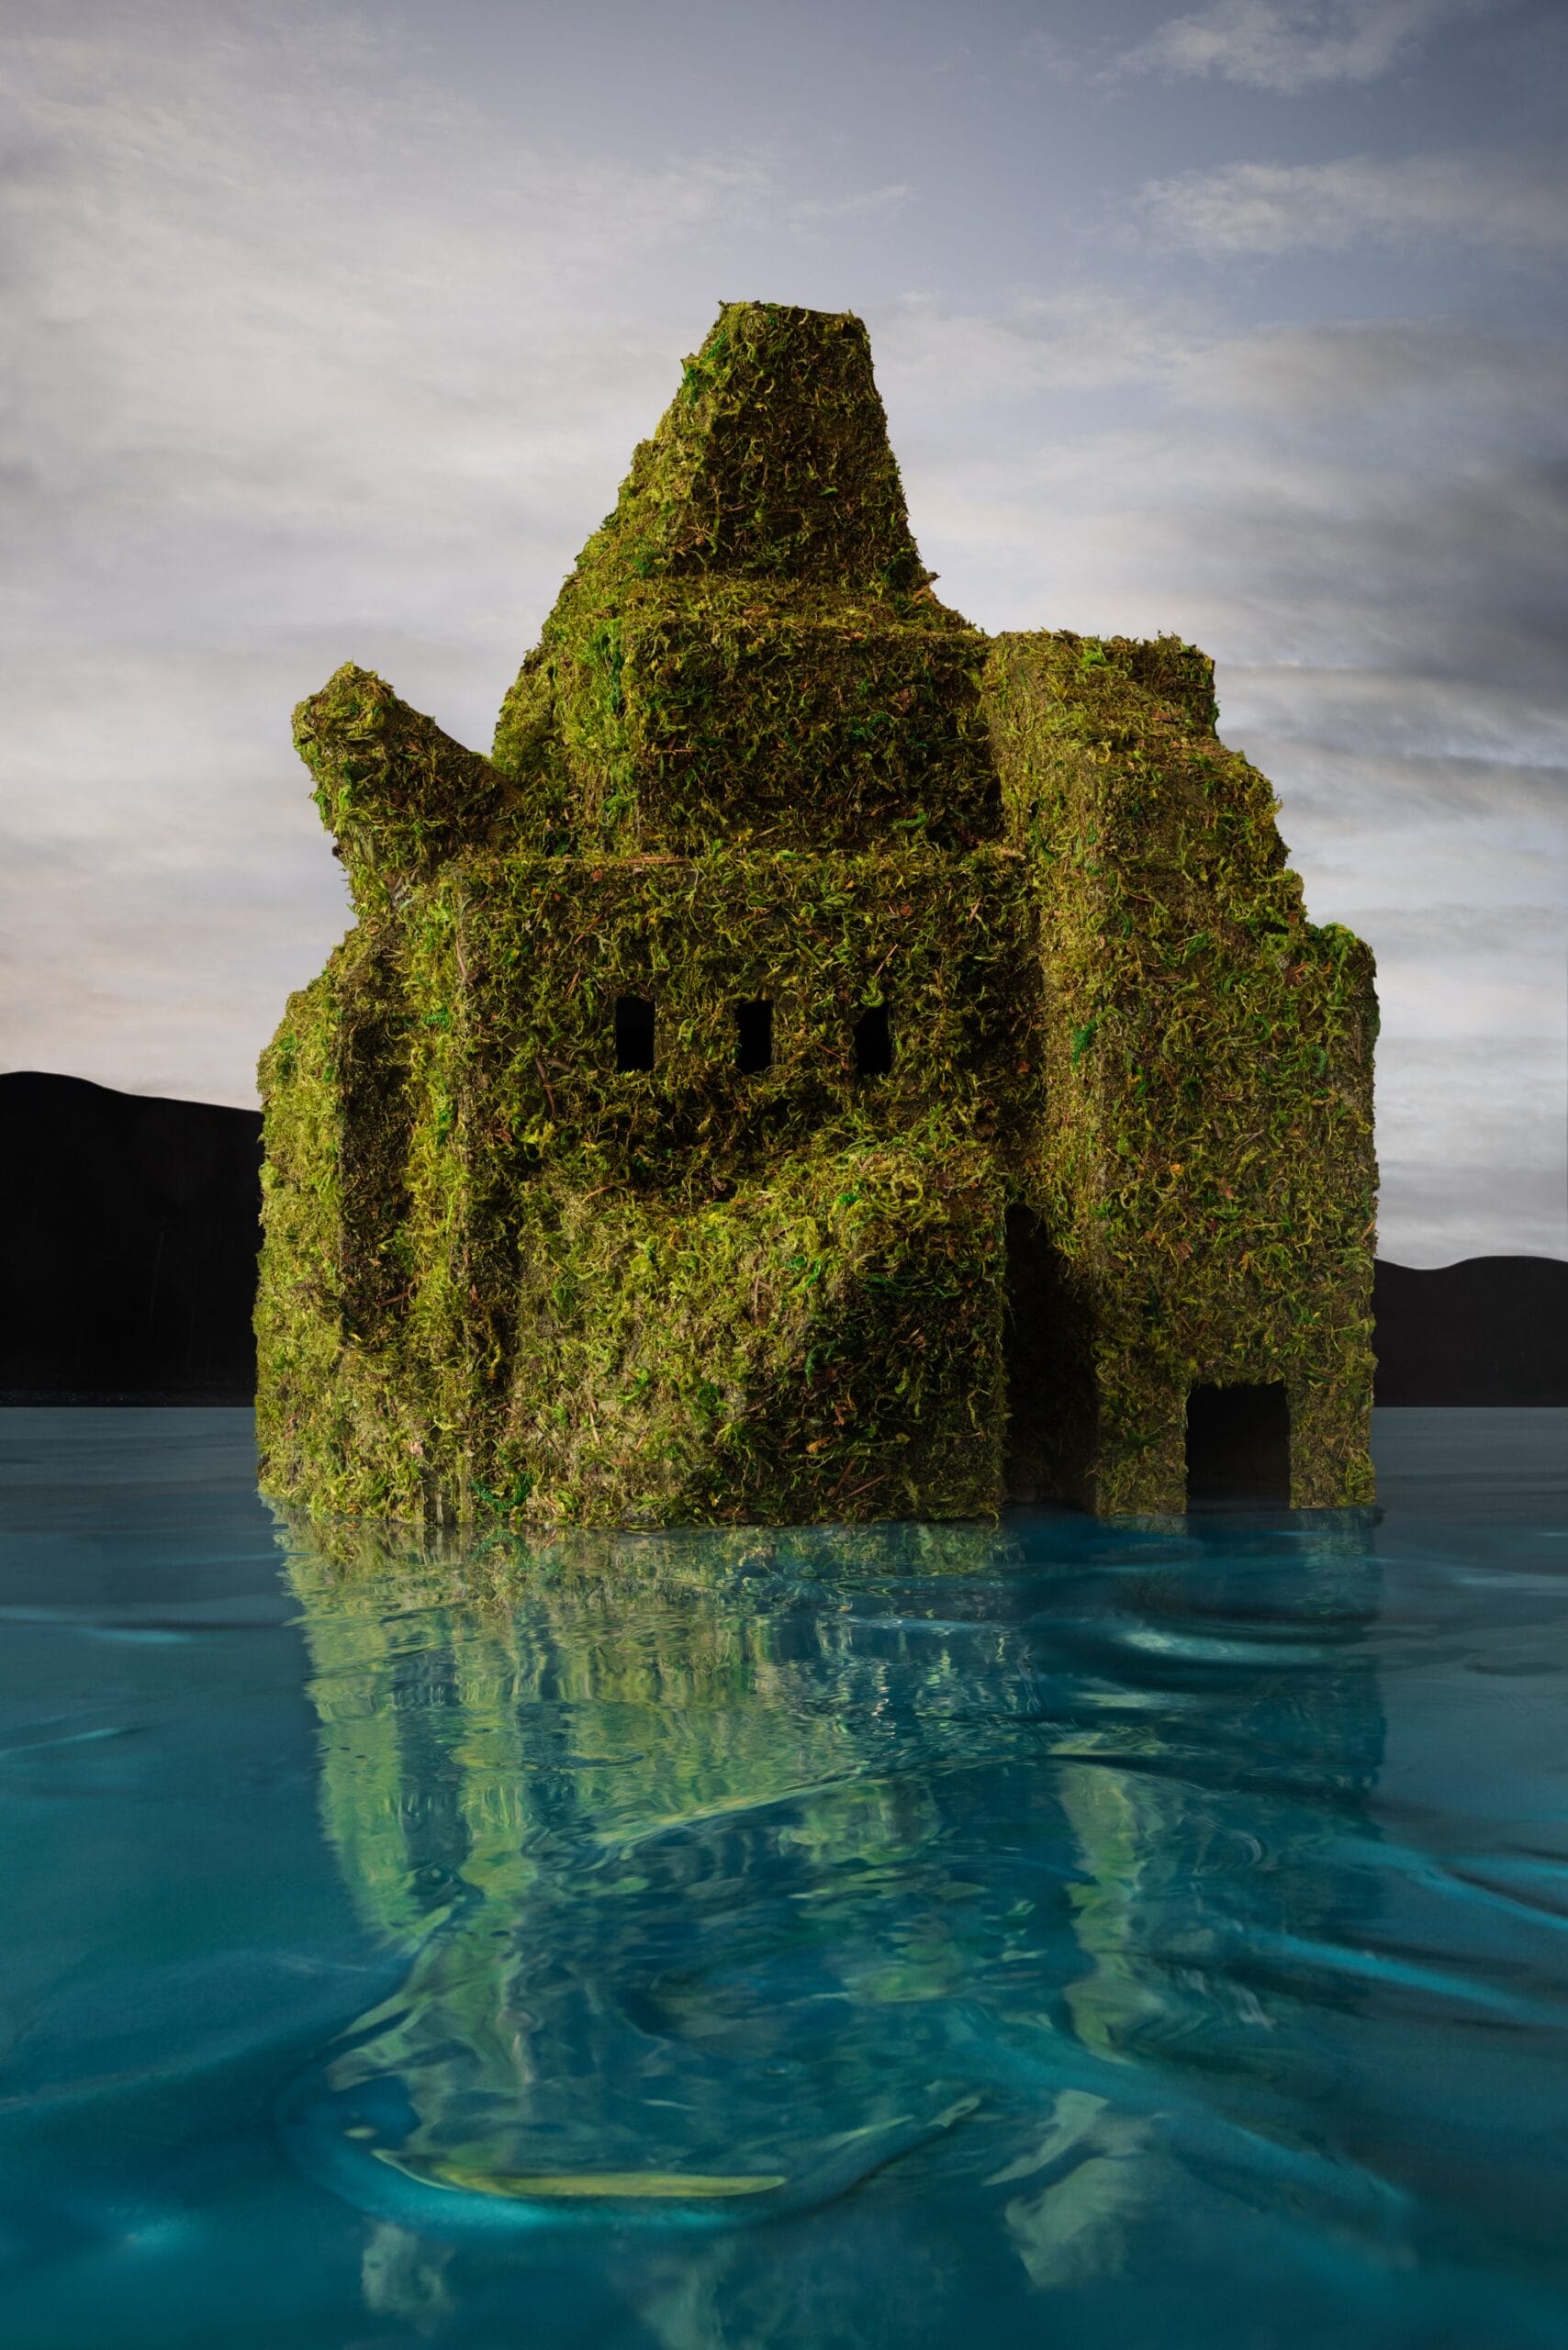 water rises around a moss enveloped architectural model